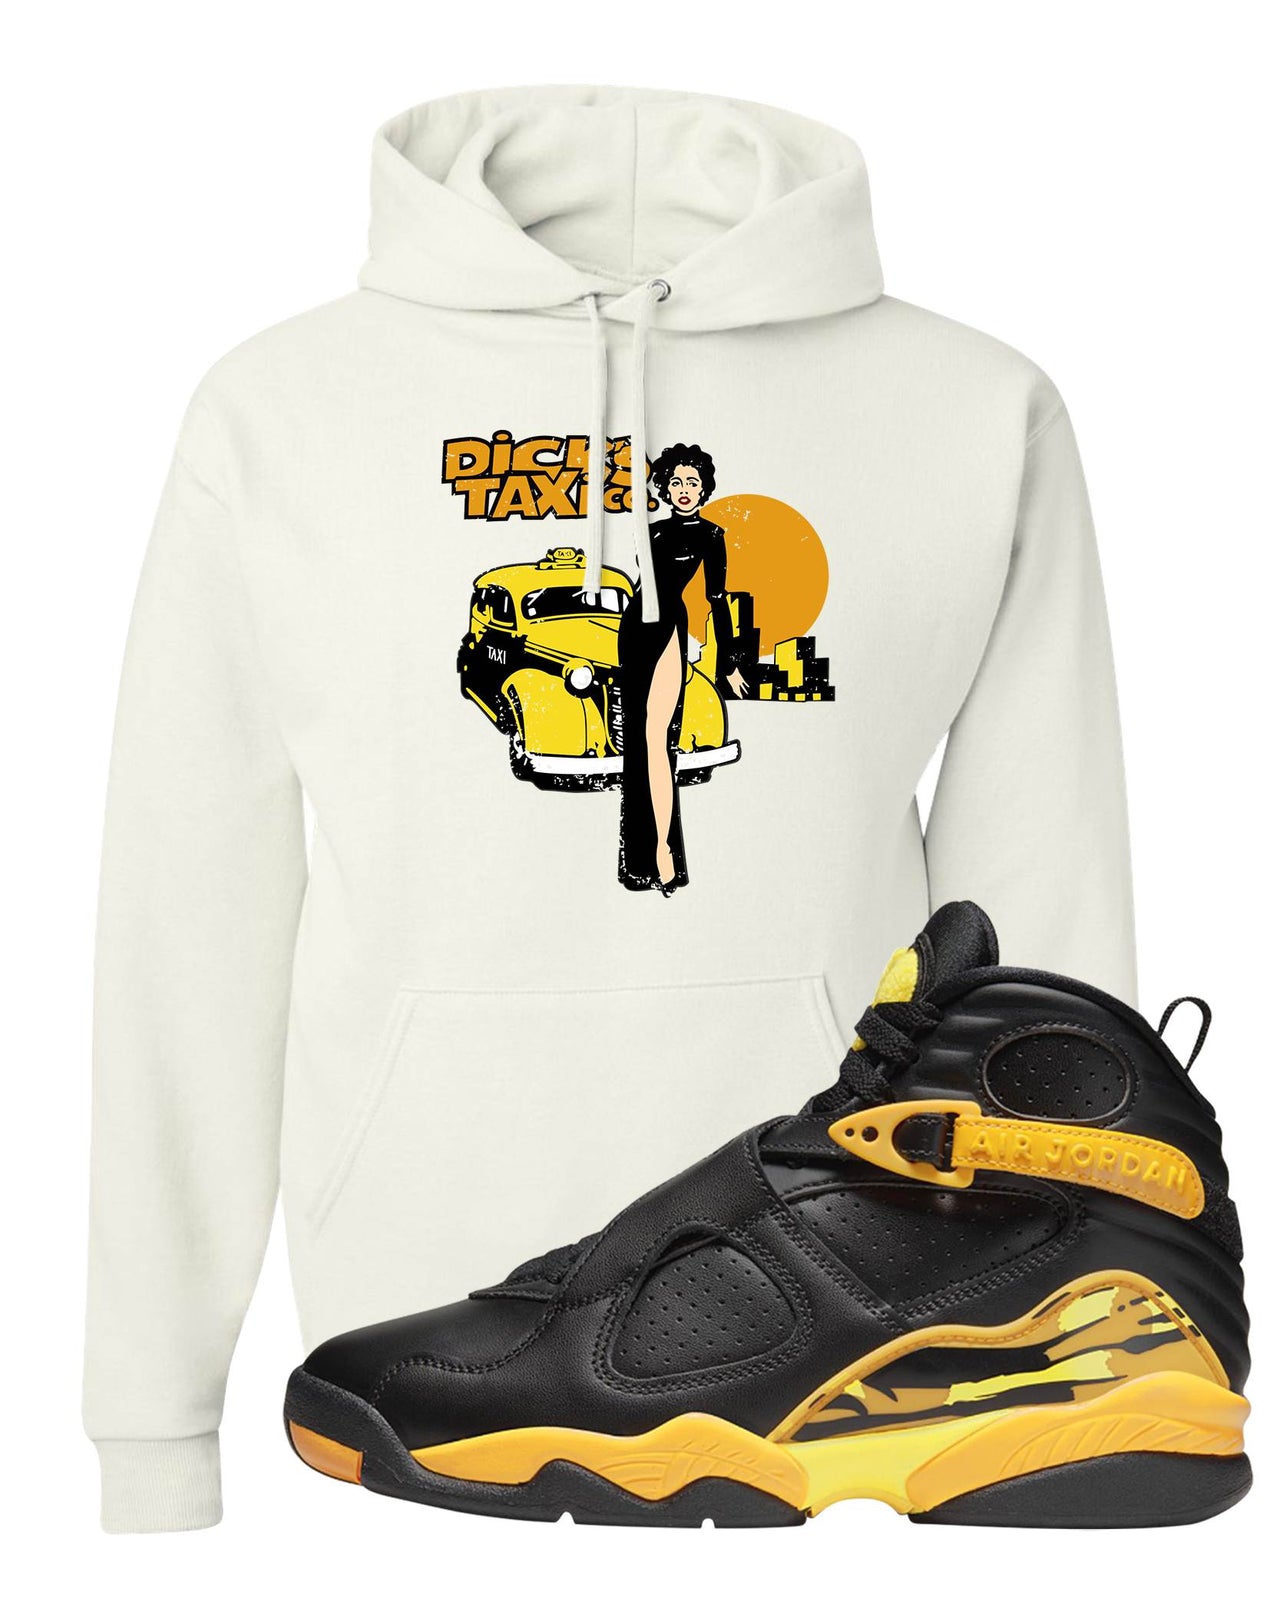 Taxi 8s Hoodie | Dick's Taxi Co., White